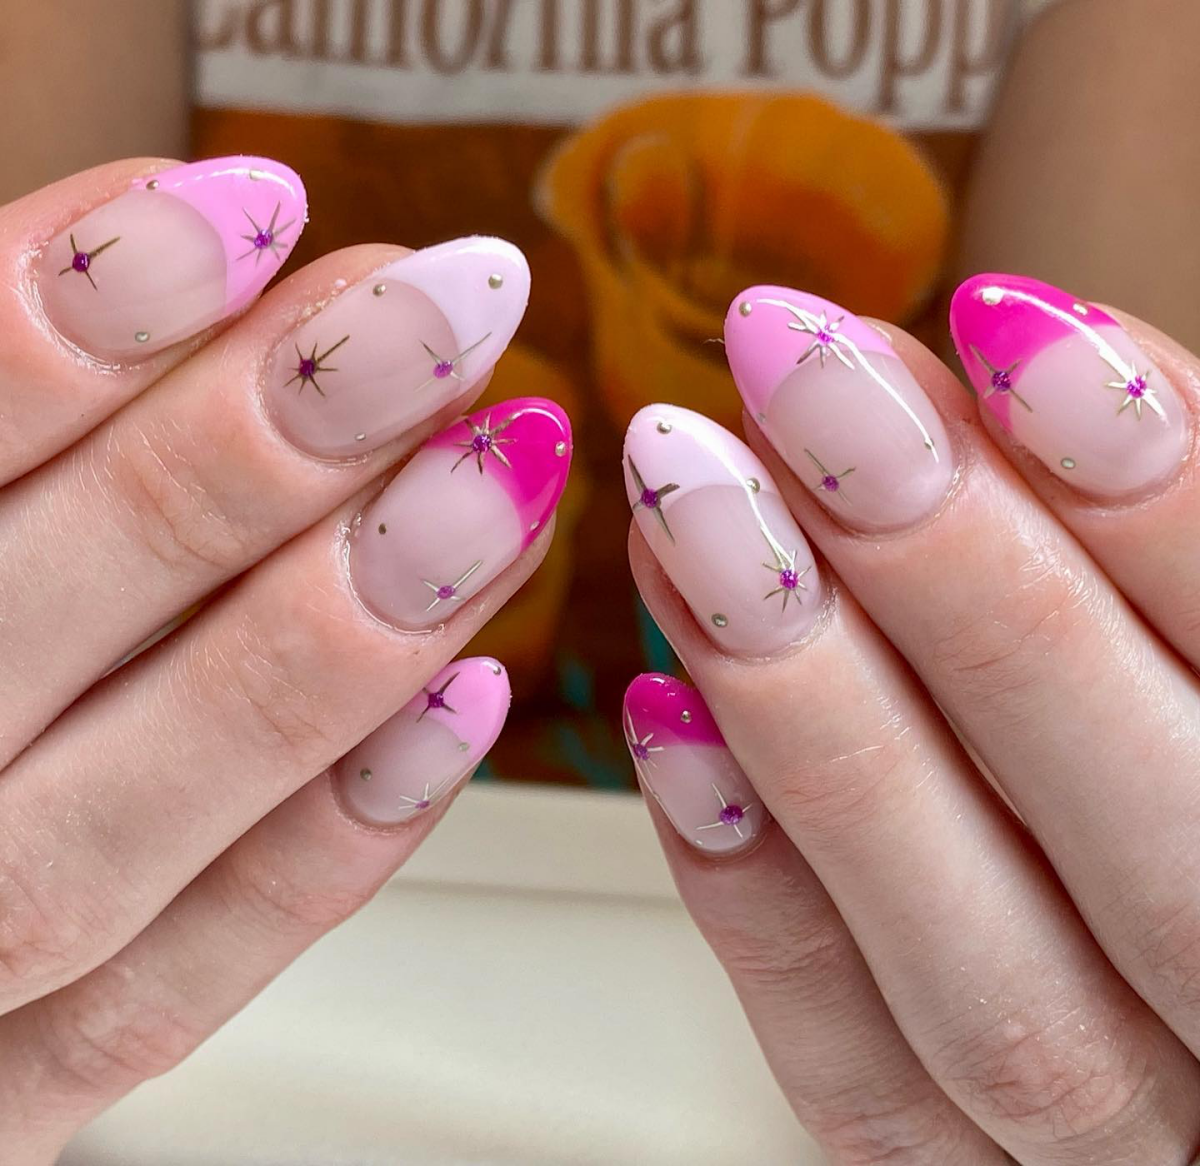 pink french tip nails with stars